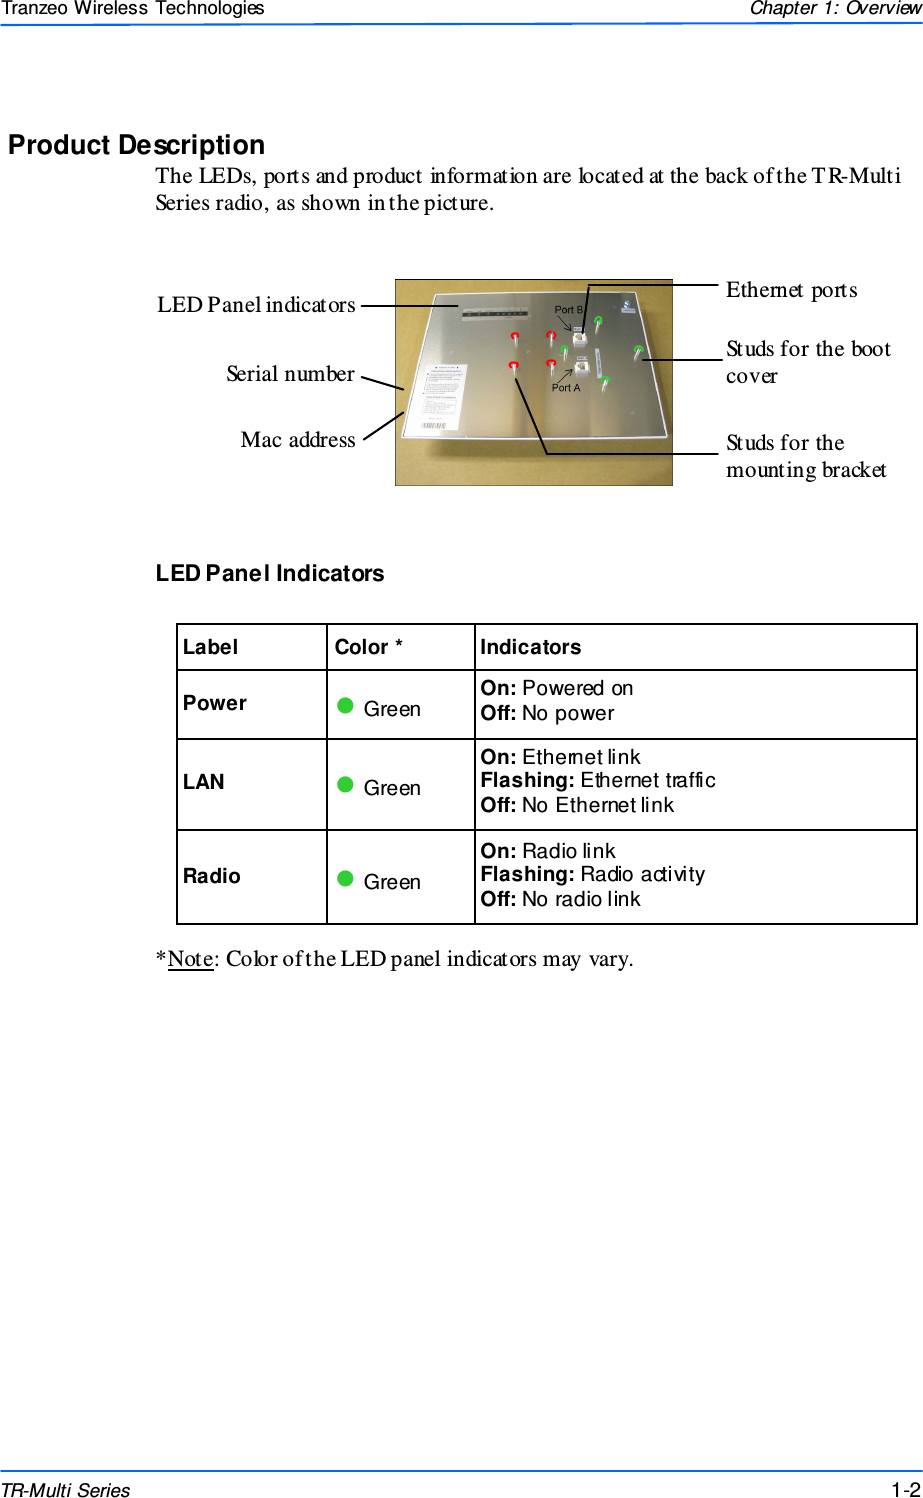  222 This document is intended for Public Distributio n                         19473 Fraser Way, Pitt Meadows, B.C. Canada V3Y  2V4 Chapter 1: Overview 1-2 TR-Multi Series Tranzeo Wireless Technologies Product Description The LEDs, ports and product information are located at the back of the T R-Multi Series radio, as shown in the picture.              LED Panel Indicators      *Note: Color of the LED panel indicators may vary. Label  Color *  Indicators Power   Green On: Powered on Off: No power LAN   Green On: Ethernet link Flashing: Ethernet traffic Off: No Ethernet link Radio   Green On: Radio link Flashing: Radio activity Off: No radio link LED Panel indicators Mac address  Ethernet ports Serial number Studs for the boot cover Studs for the mounting bracket  